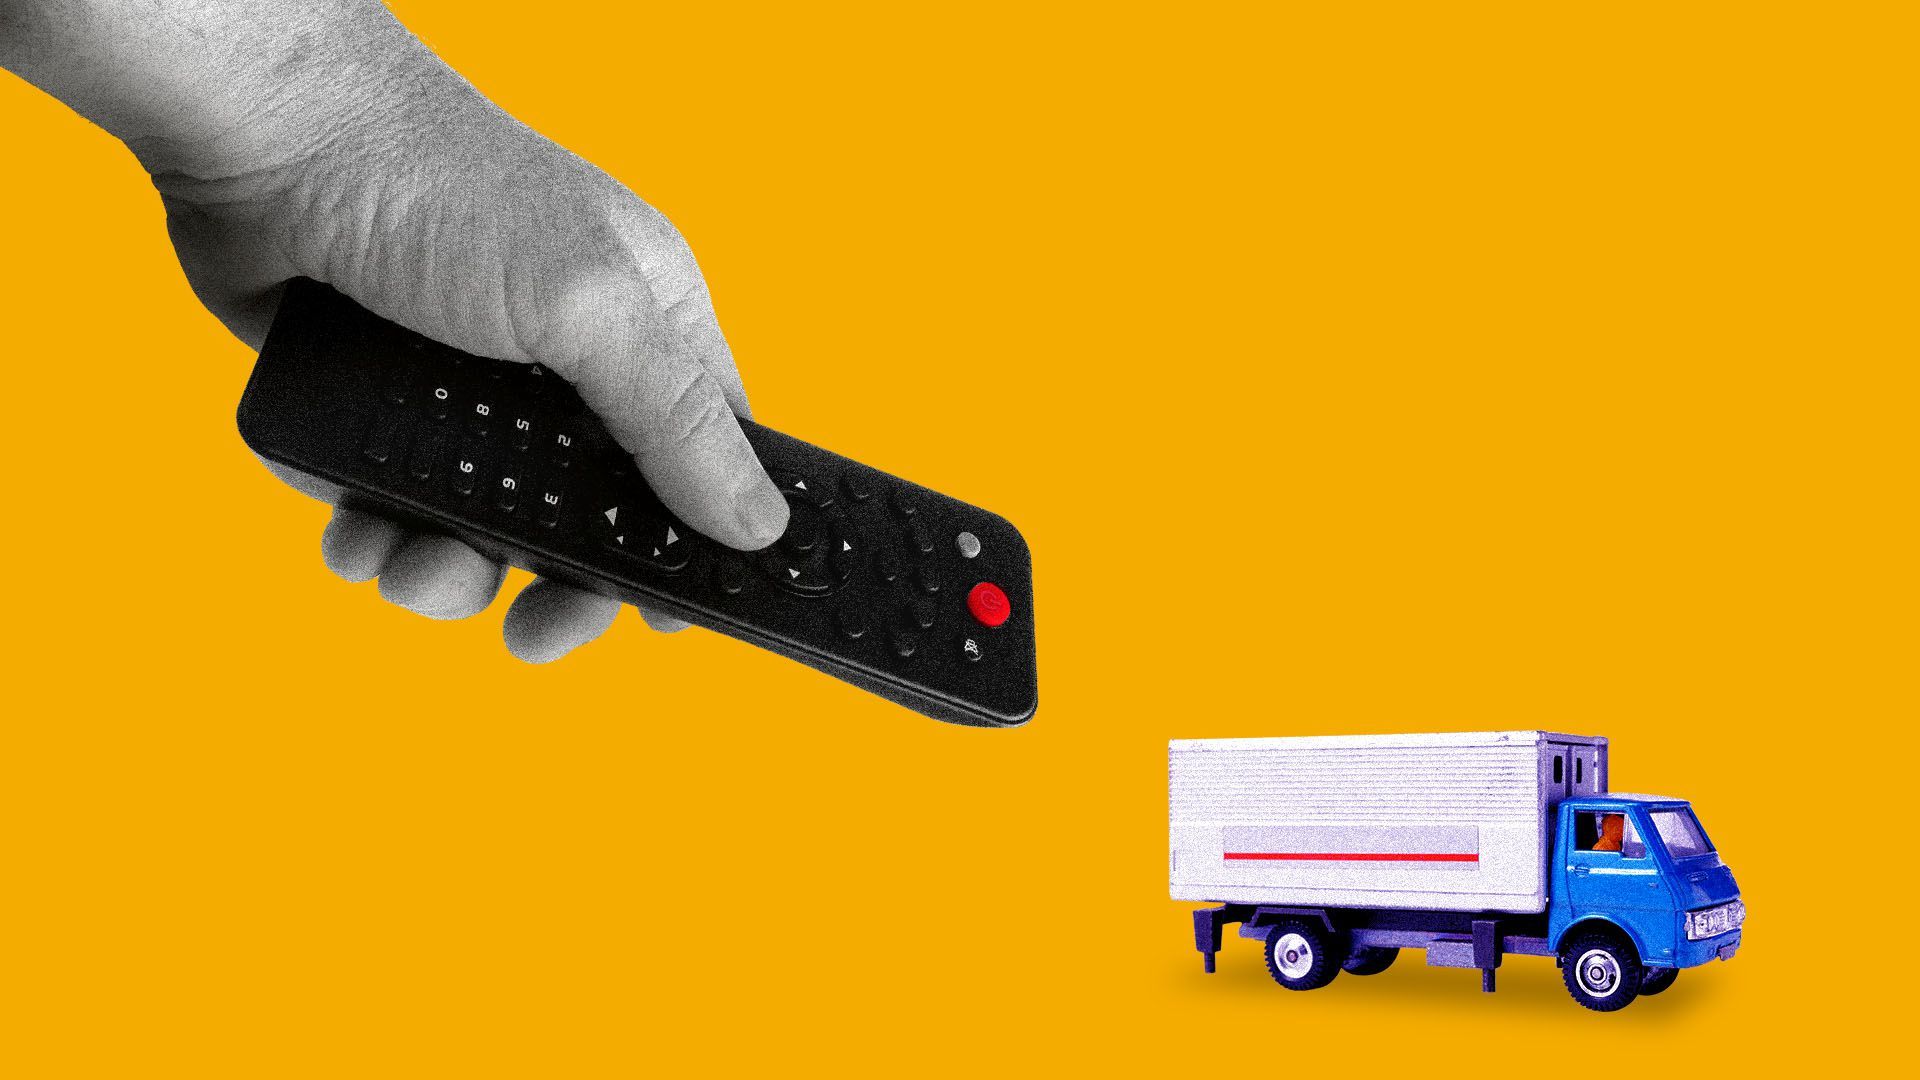 Illustration of hand with remote controlling a small truck